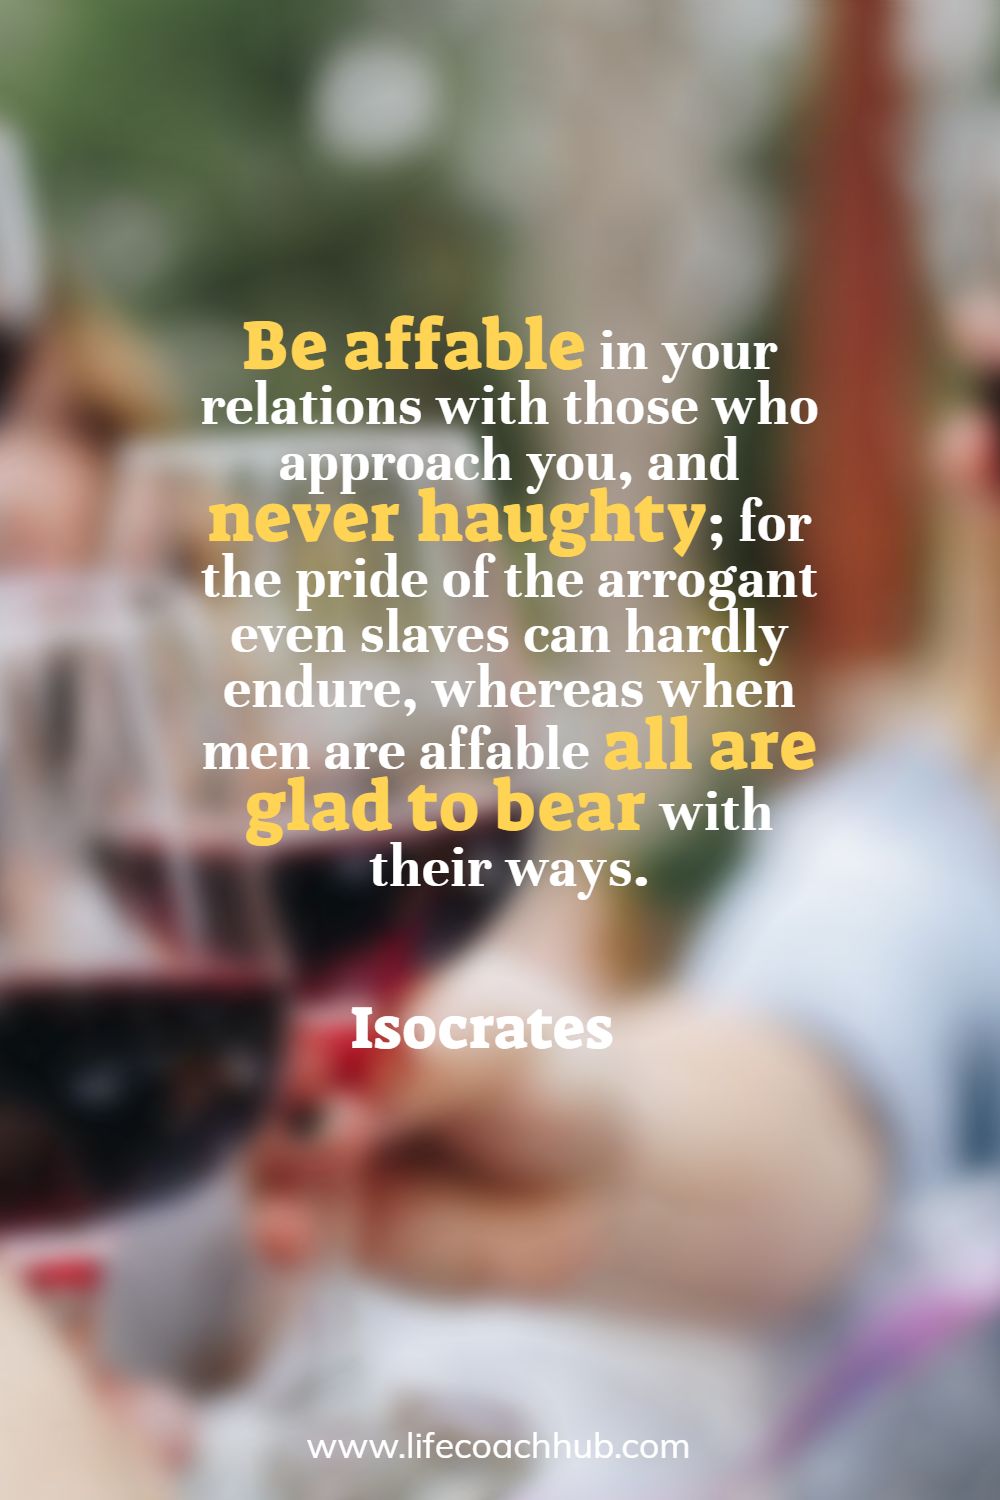 Be affable in your relations with those who approach you, and never haughty; for the pride of the arrogant even slaves can hardly endure, whereas when men are affable all are glad to bear with their ways. Isocrates Coaching Quote